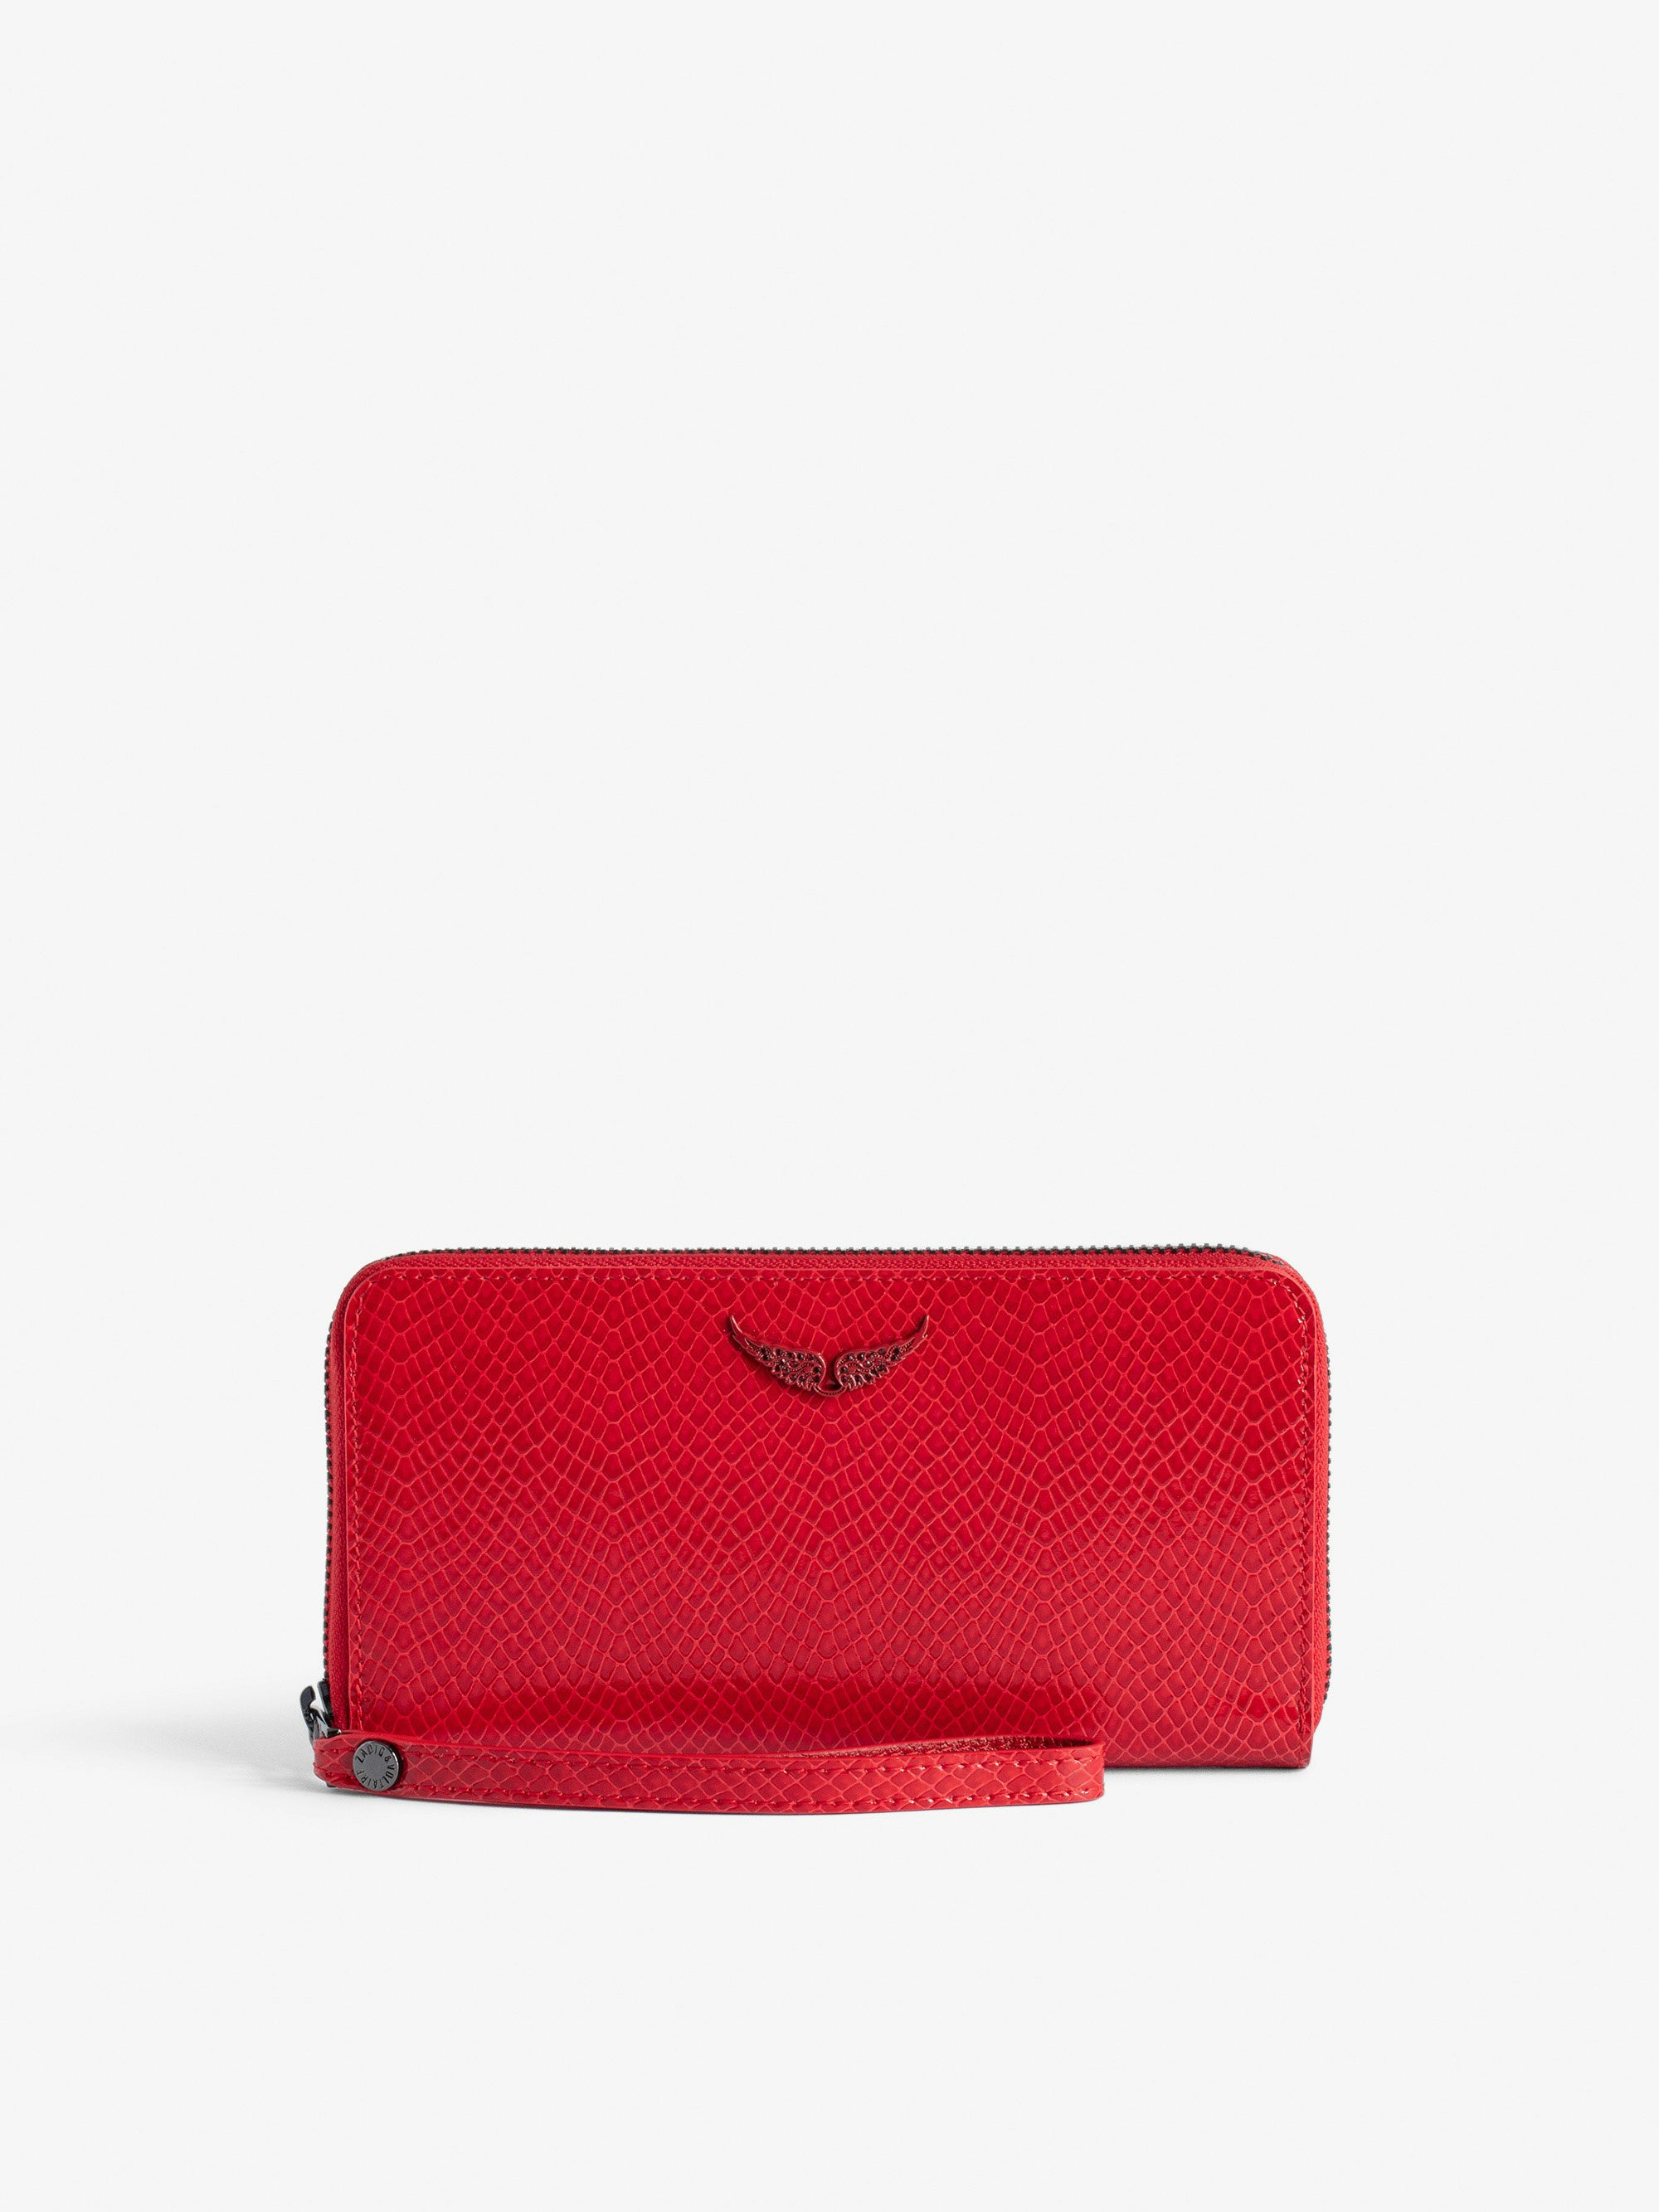 Compagnon Glossy Wild Embossed Wallet - Women’s red python-effect patent leather clutch with wings charm.